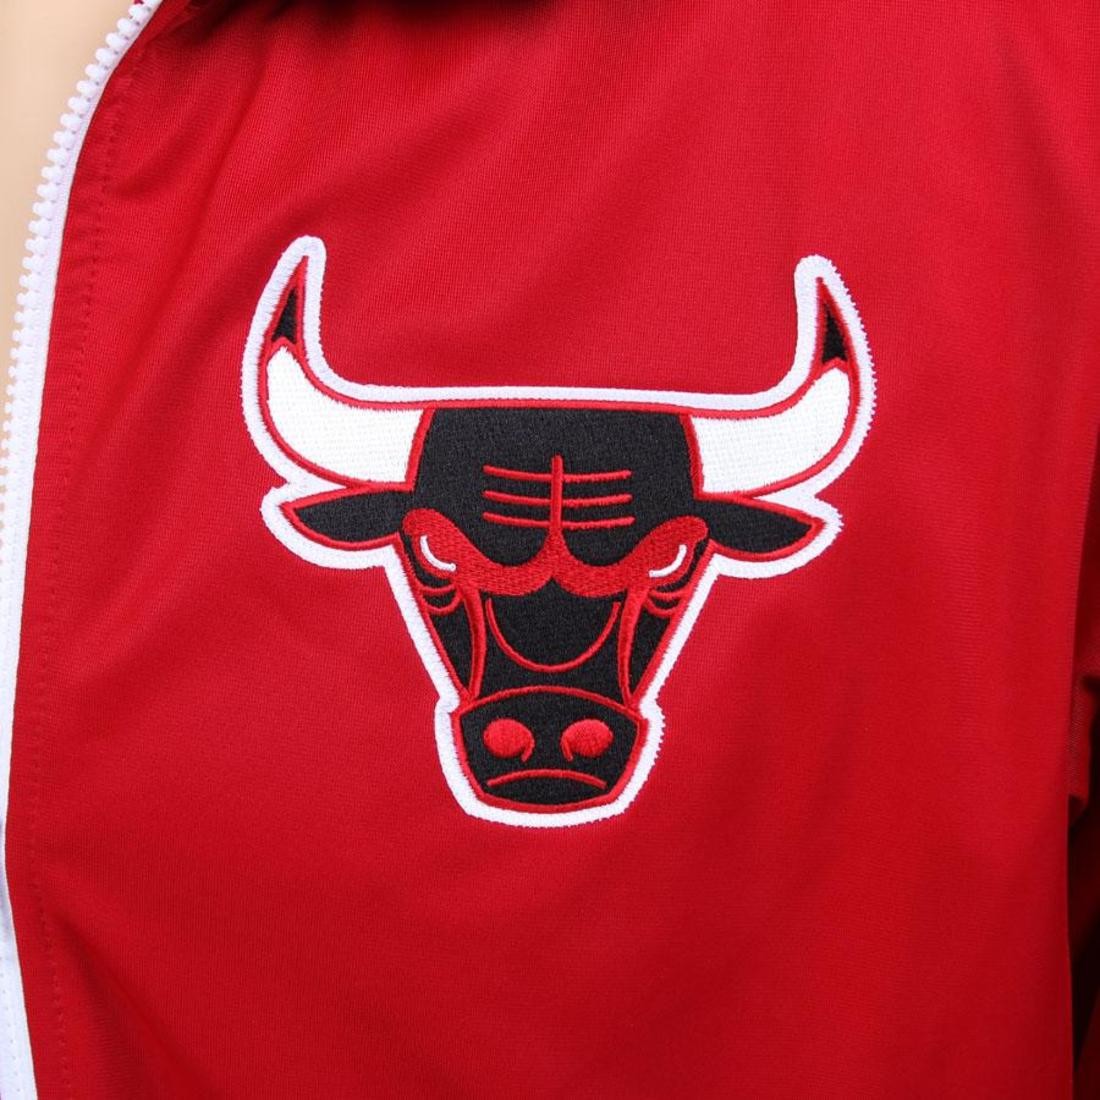 Mitchell and Ness NBA Authentic Warm Up Jacket Chicago Bulls red